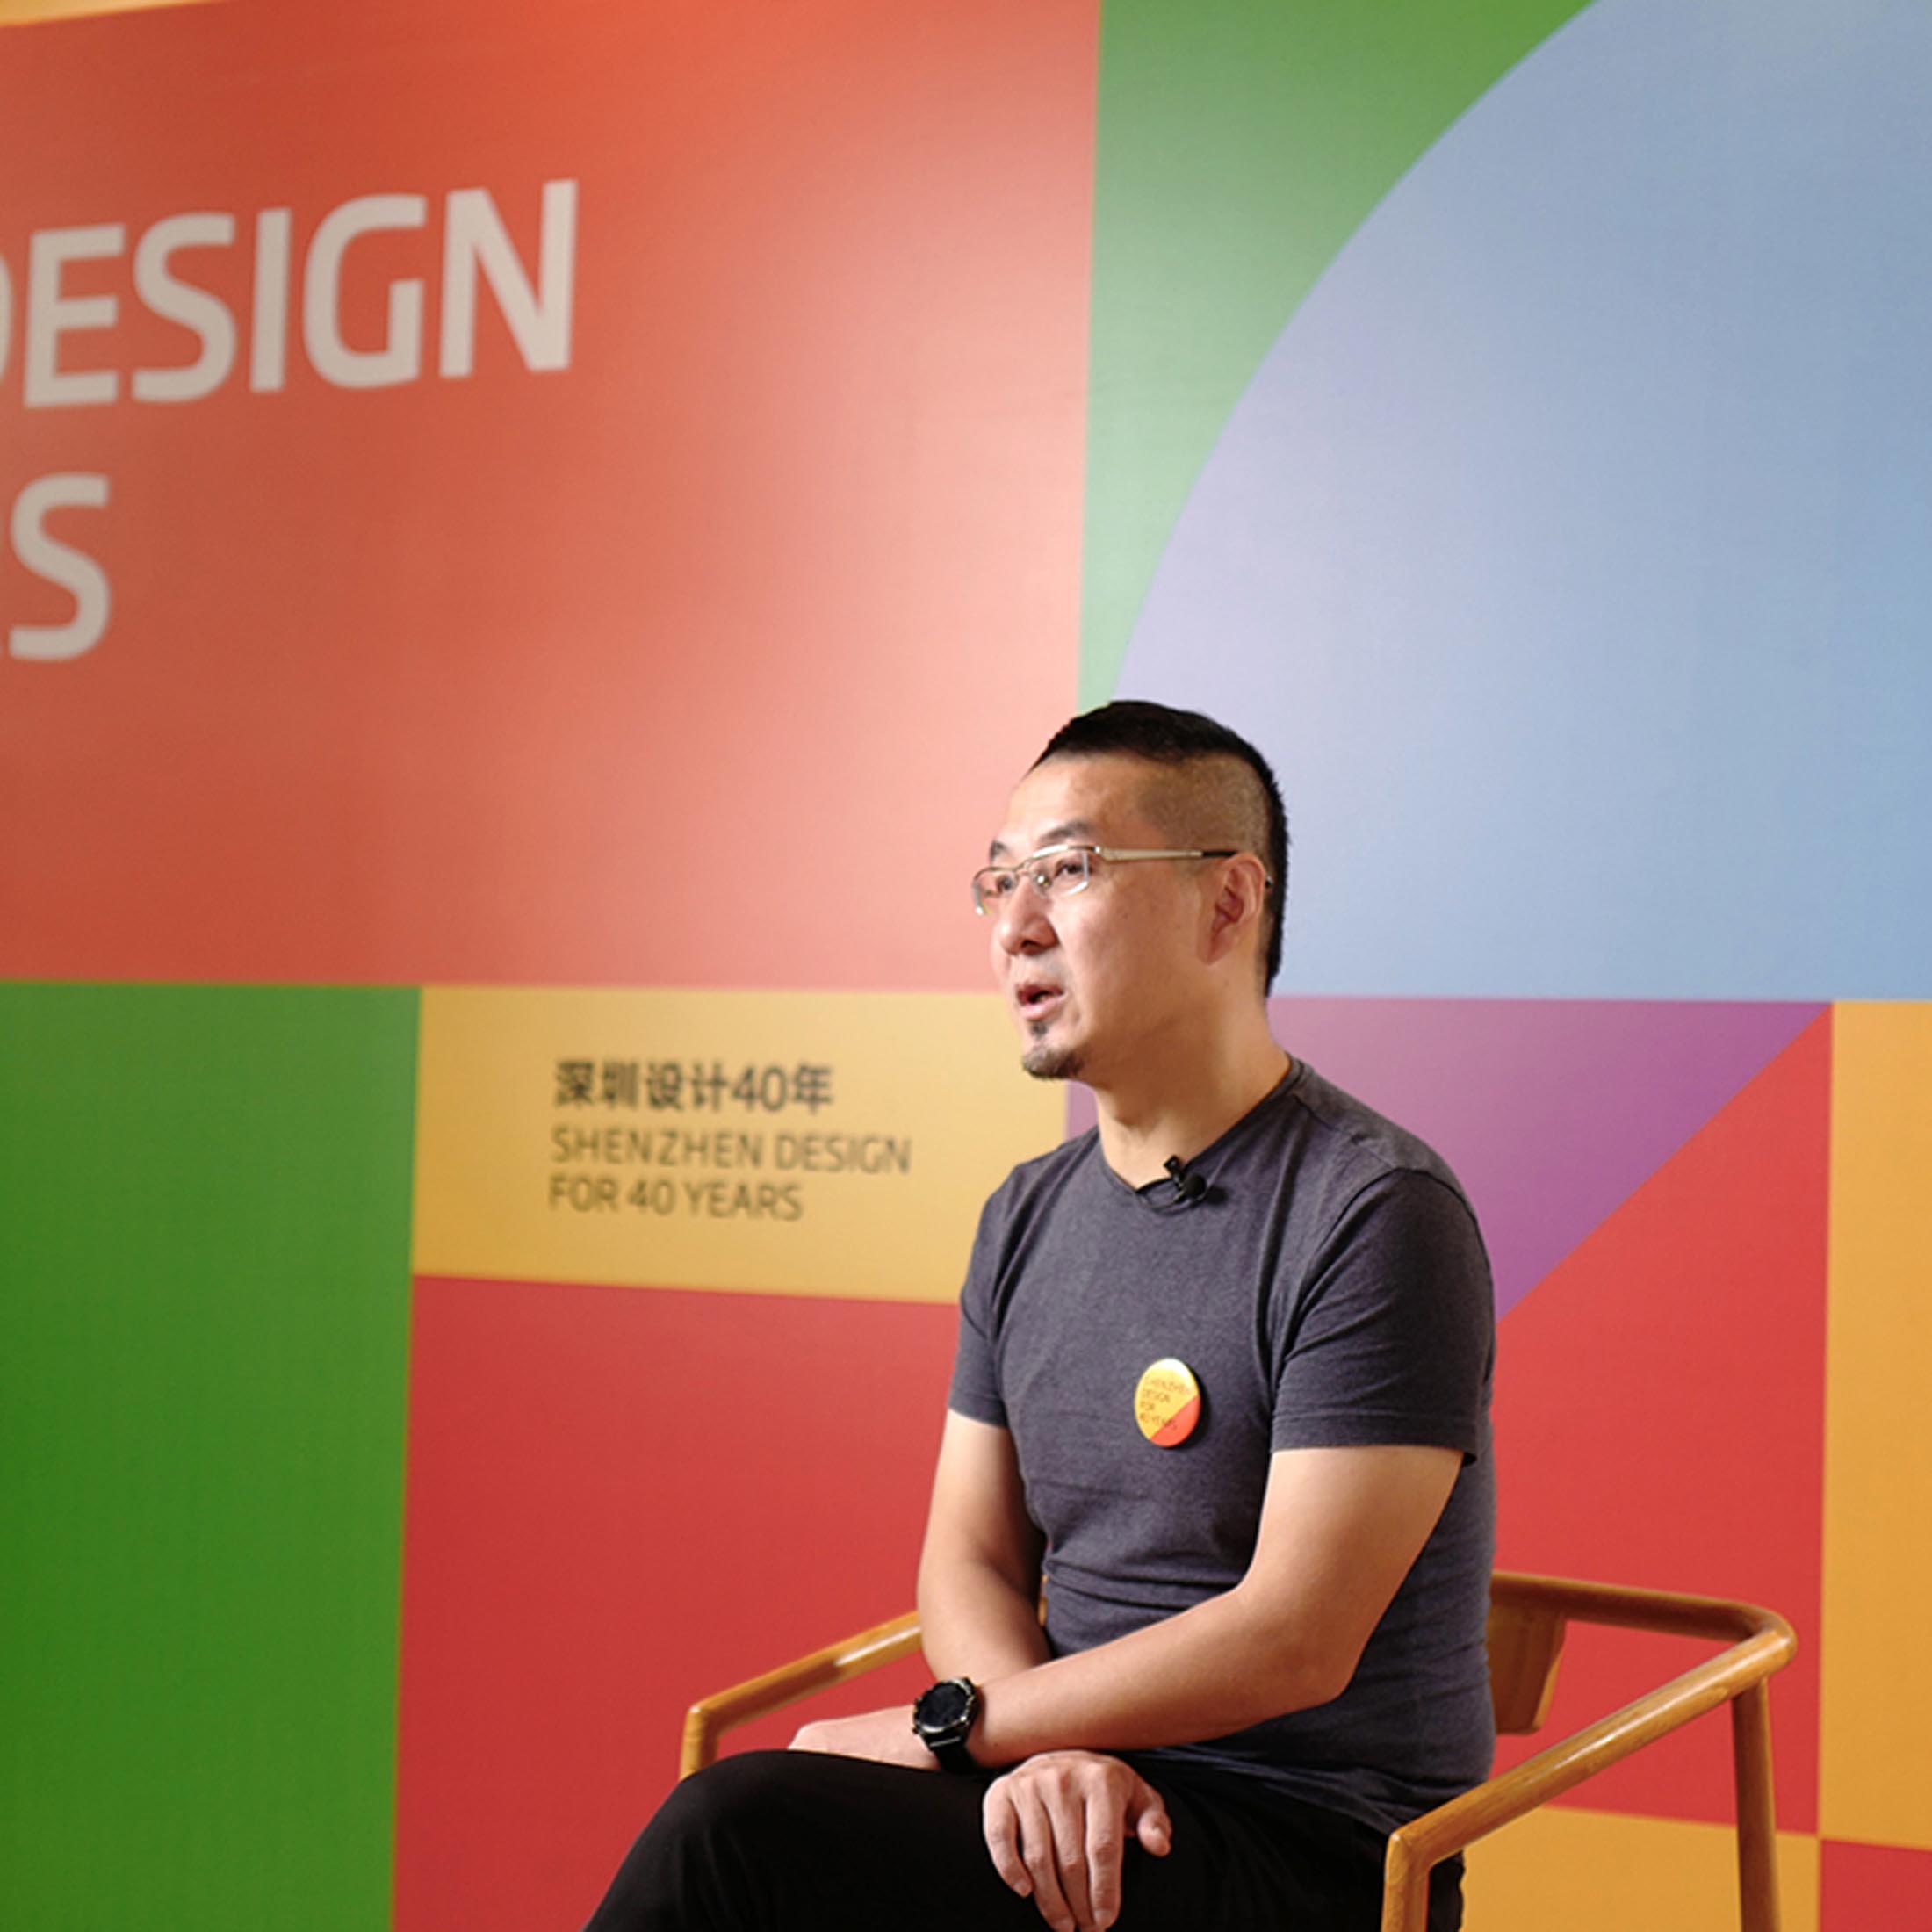 Interview with Zhang Zhiyang for 40 years of Shenzhen Design